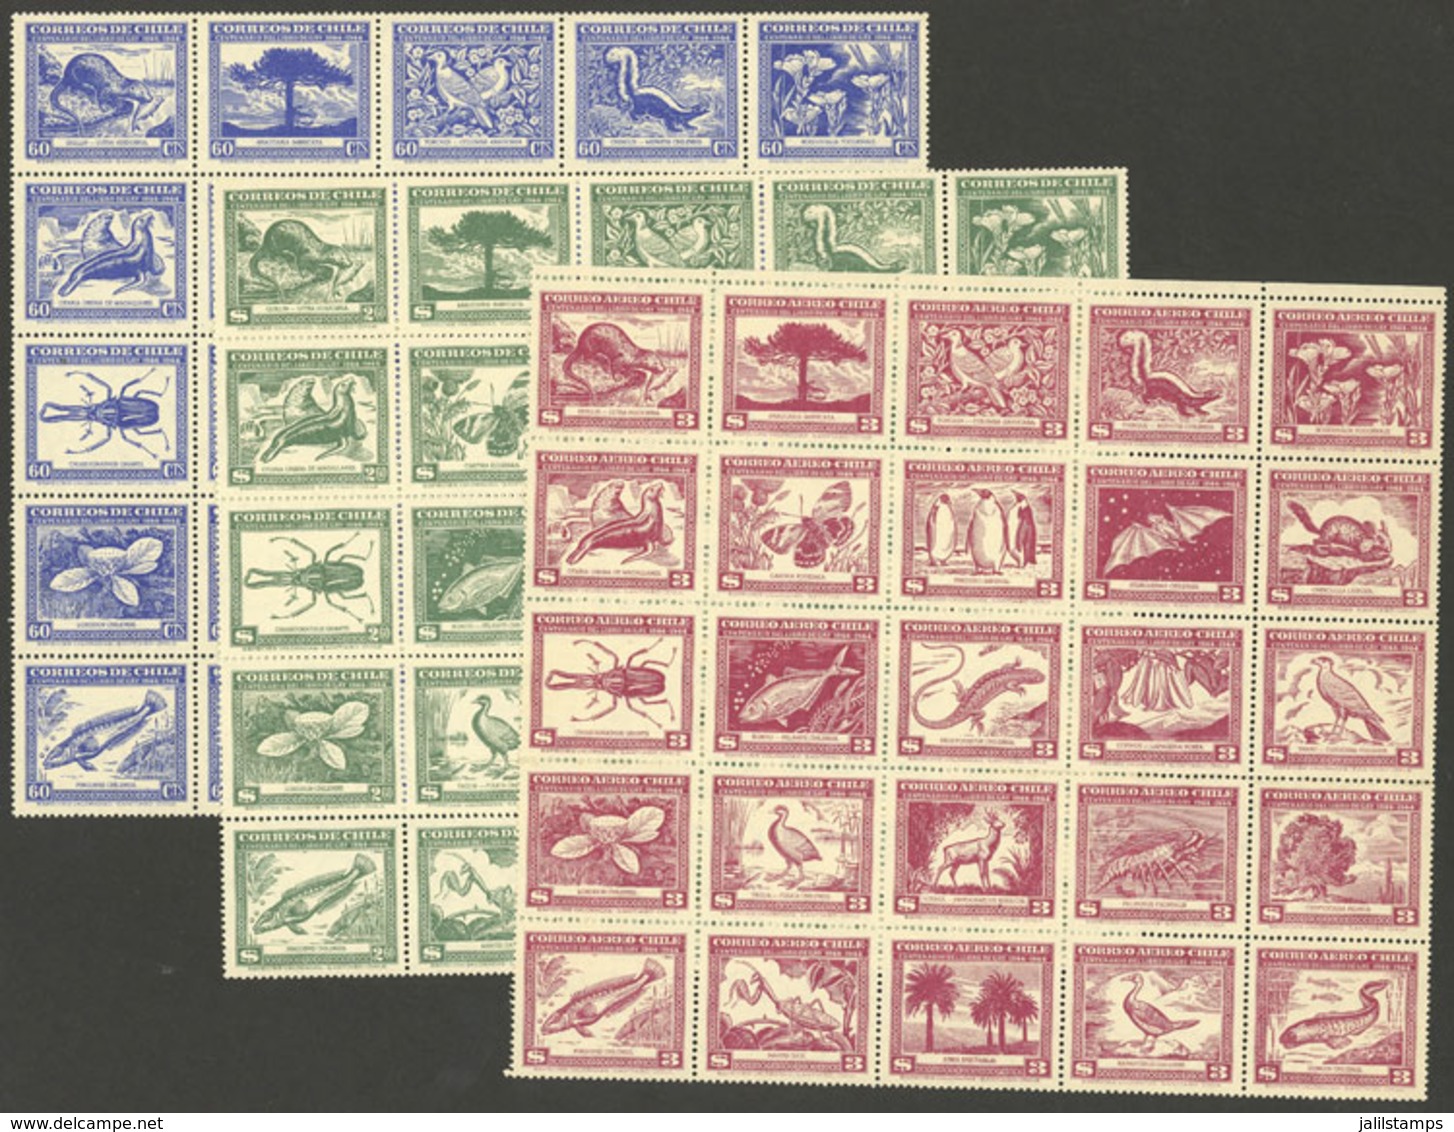 CHILE: Yvert 222/3 + A.121, 1948 Flora & Fauna, The Cmpl. Set Of 75 Stamps, VF Quality, Almost All MNH (only 4 Or 5 Exam - Chili